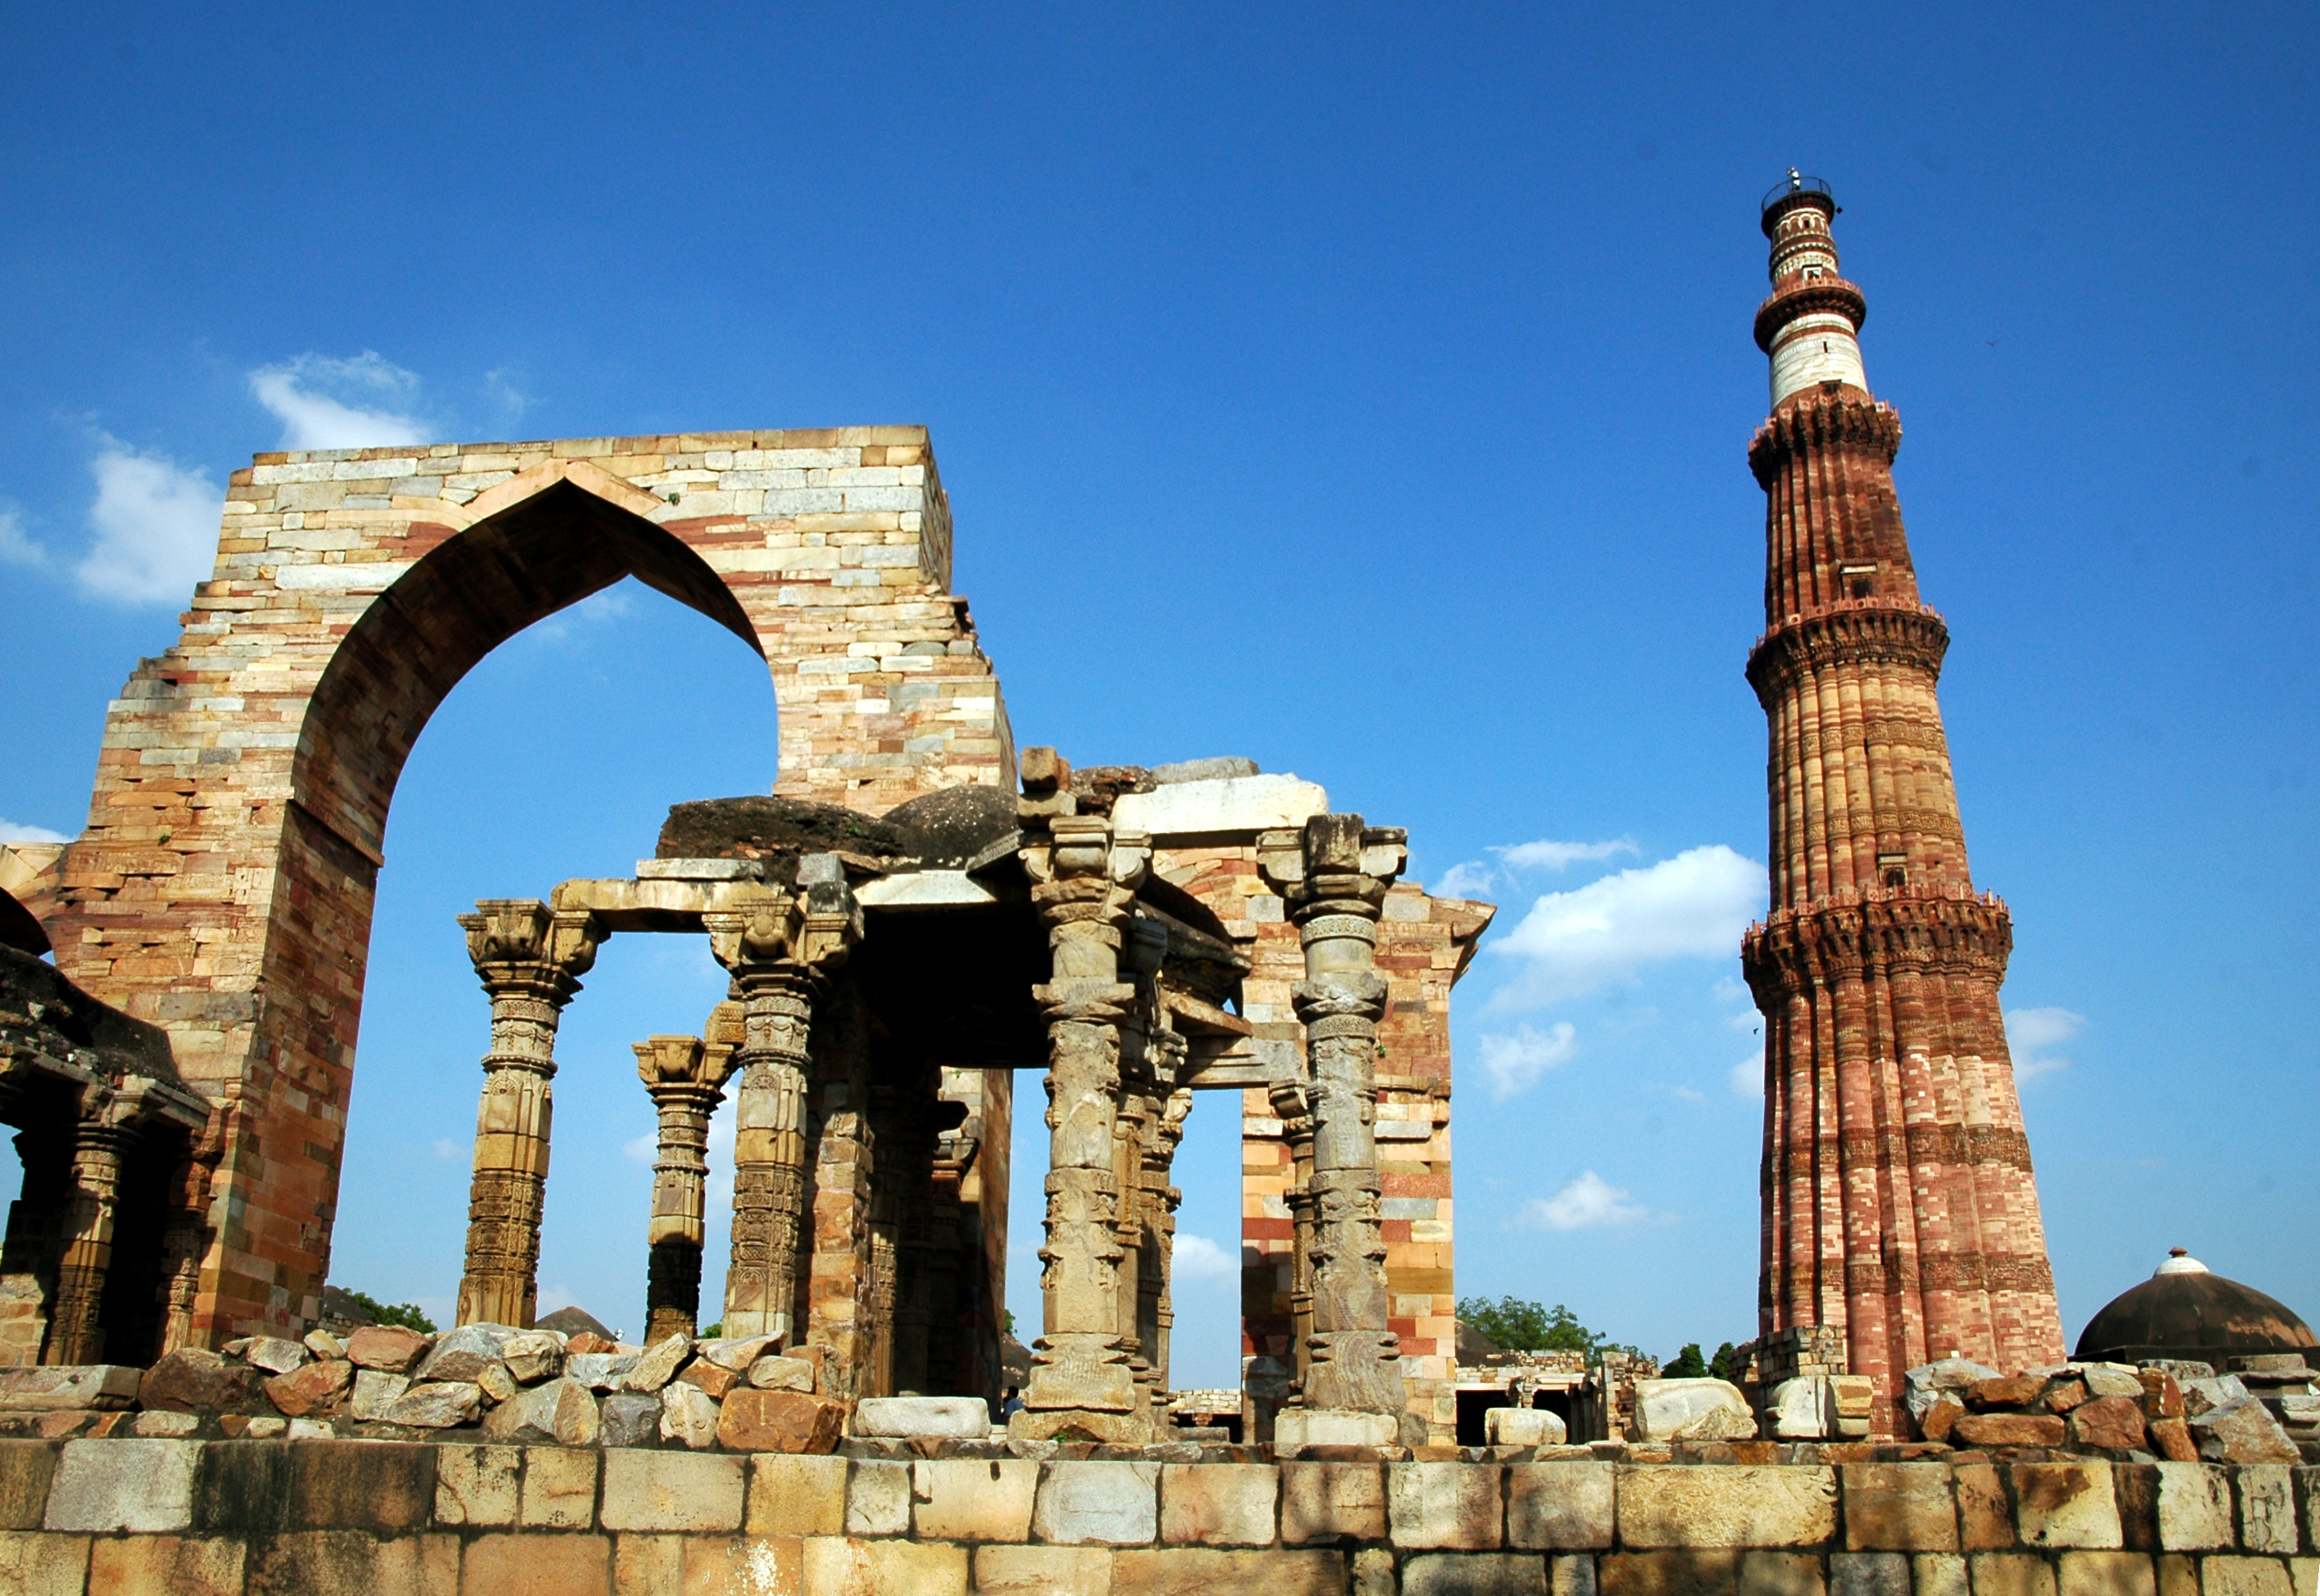 All-Inclusive Private Sightseeing Tour of Delhi.